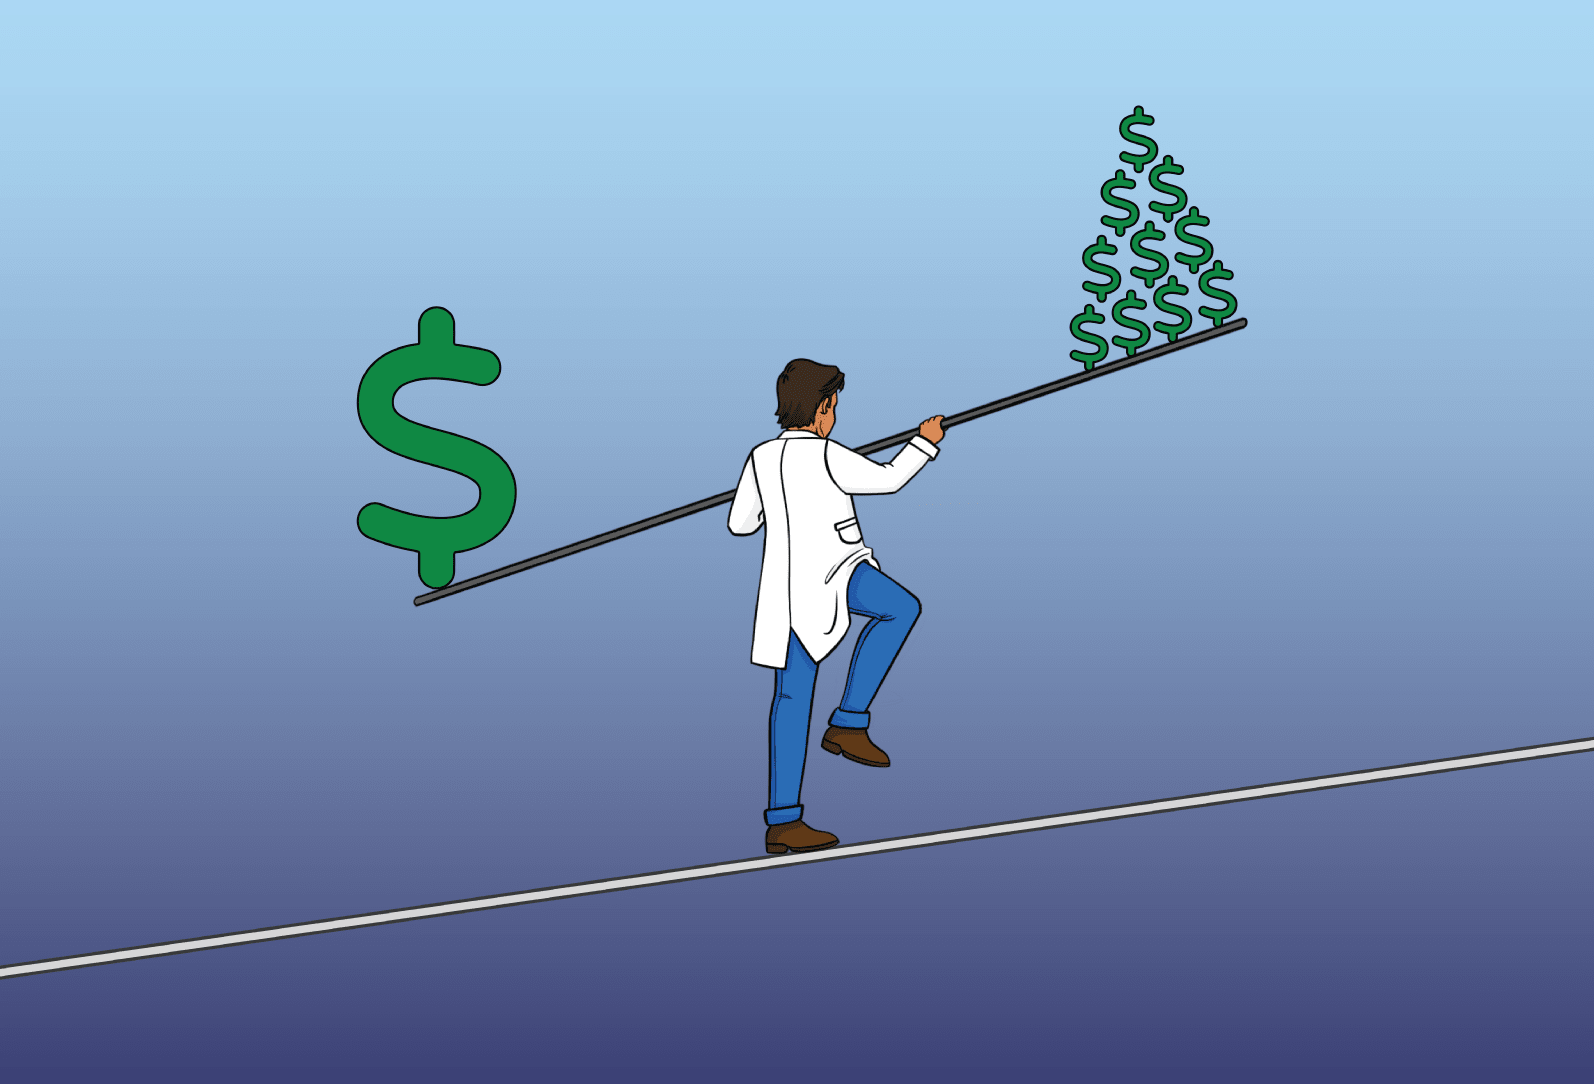 doctor on a zipline balancing a scale with revenue represented as dollar signs